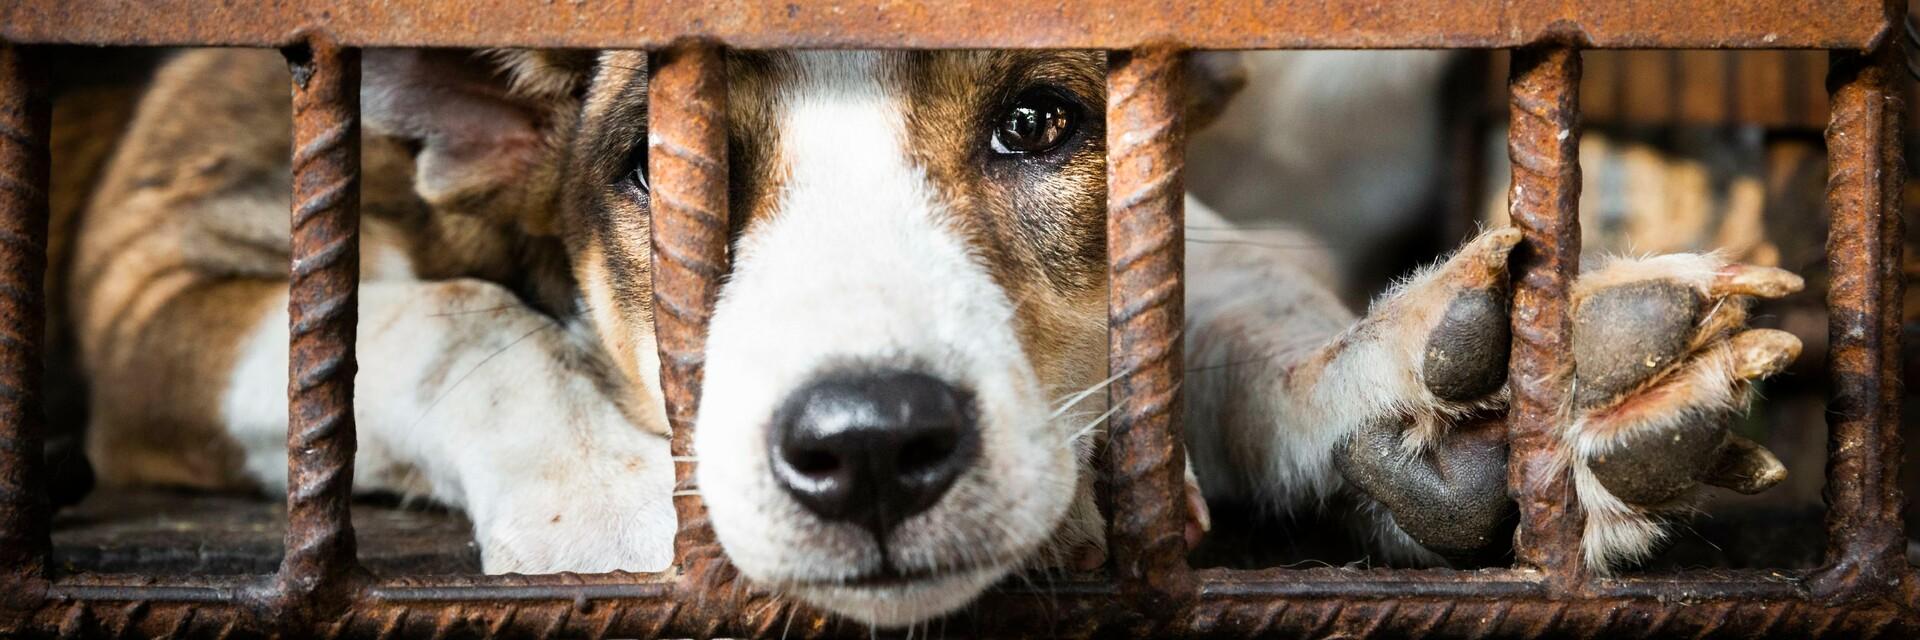 Dog looking through cage in the dog meat trade